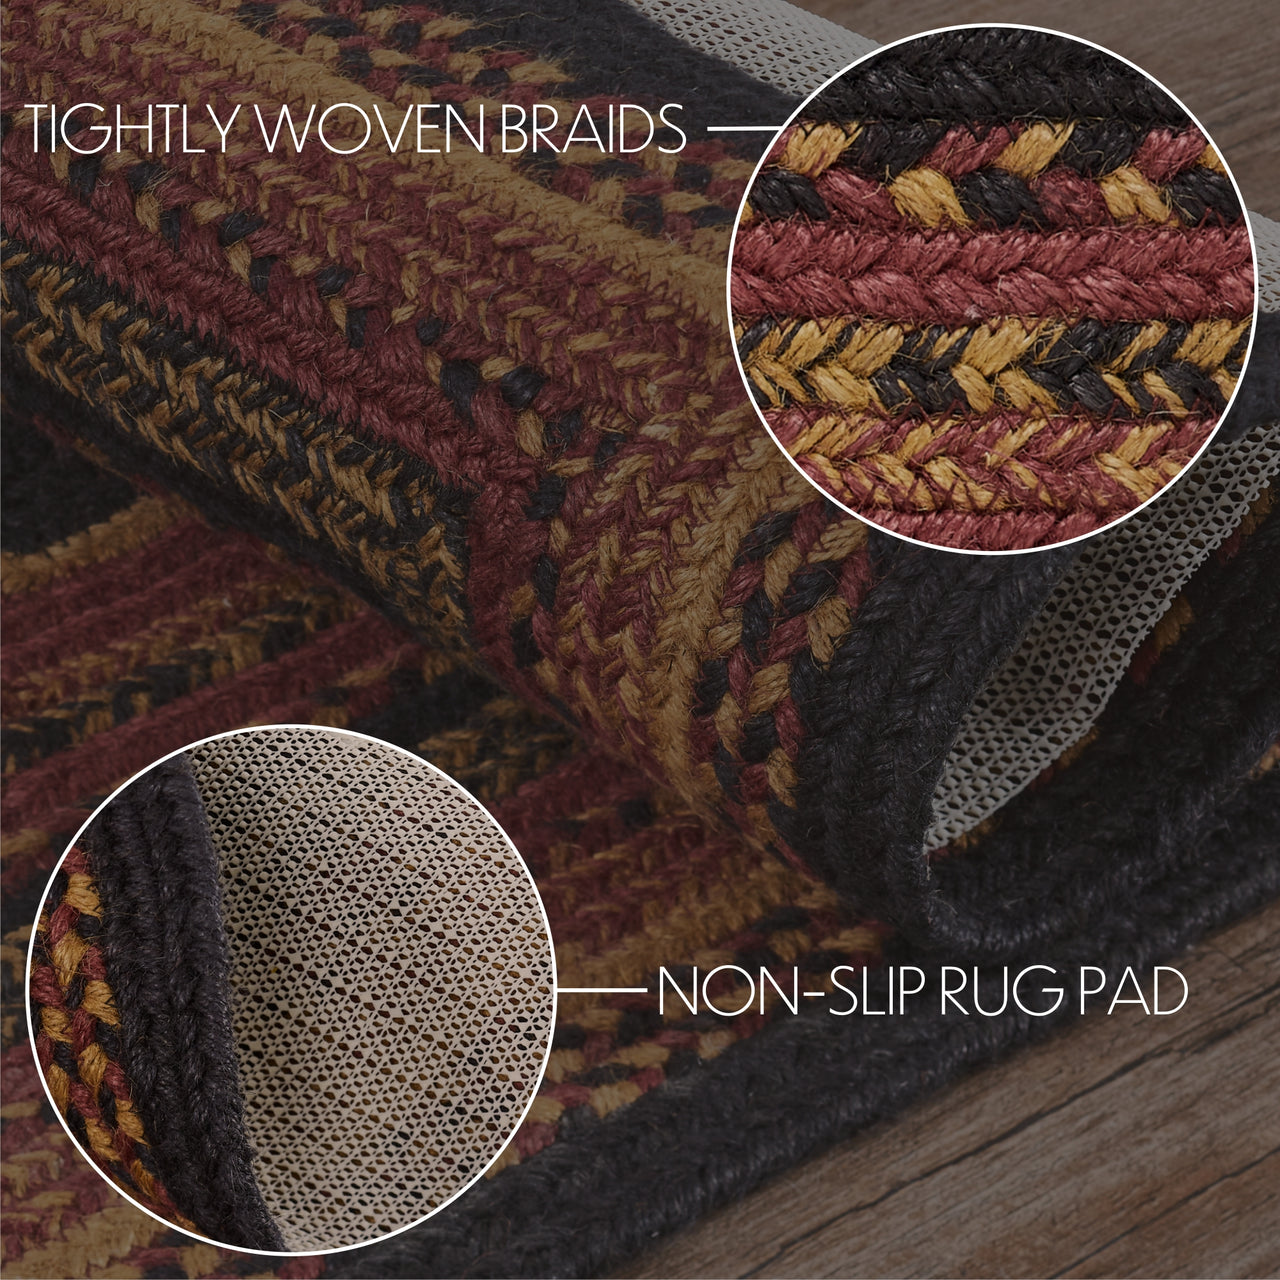 Heritage Farms Jute Braided Rug/Runner Rect. with Rug Pad 2'x8' VHC Brands